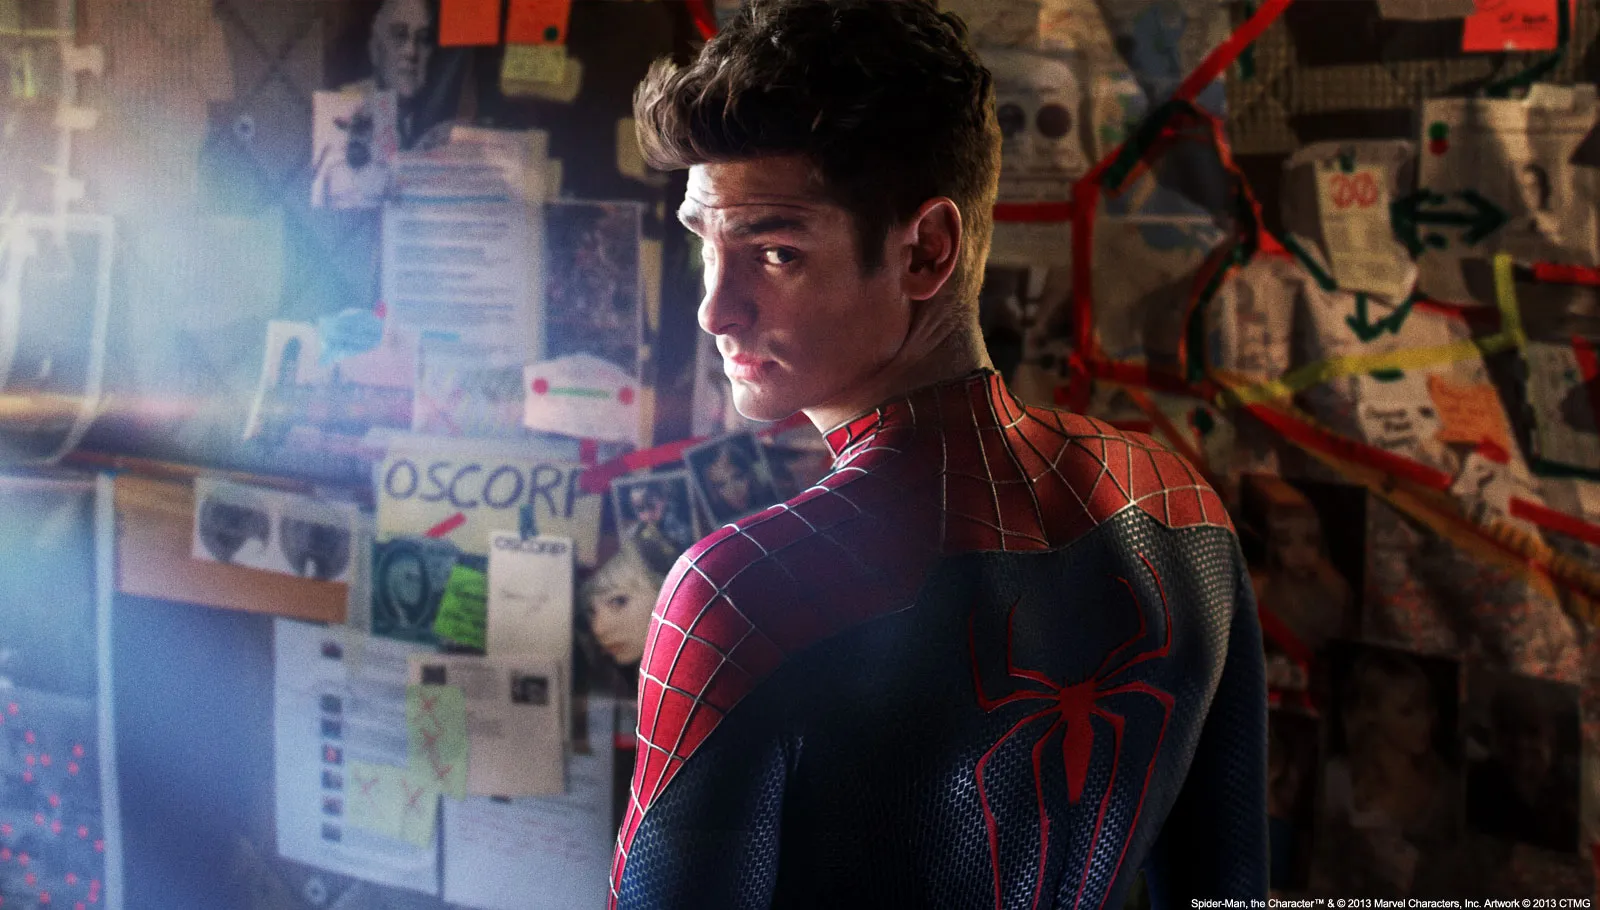 Andrew Garfield in The Amazing Spider-Man 2 (2014).